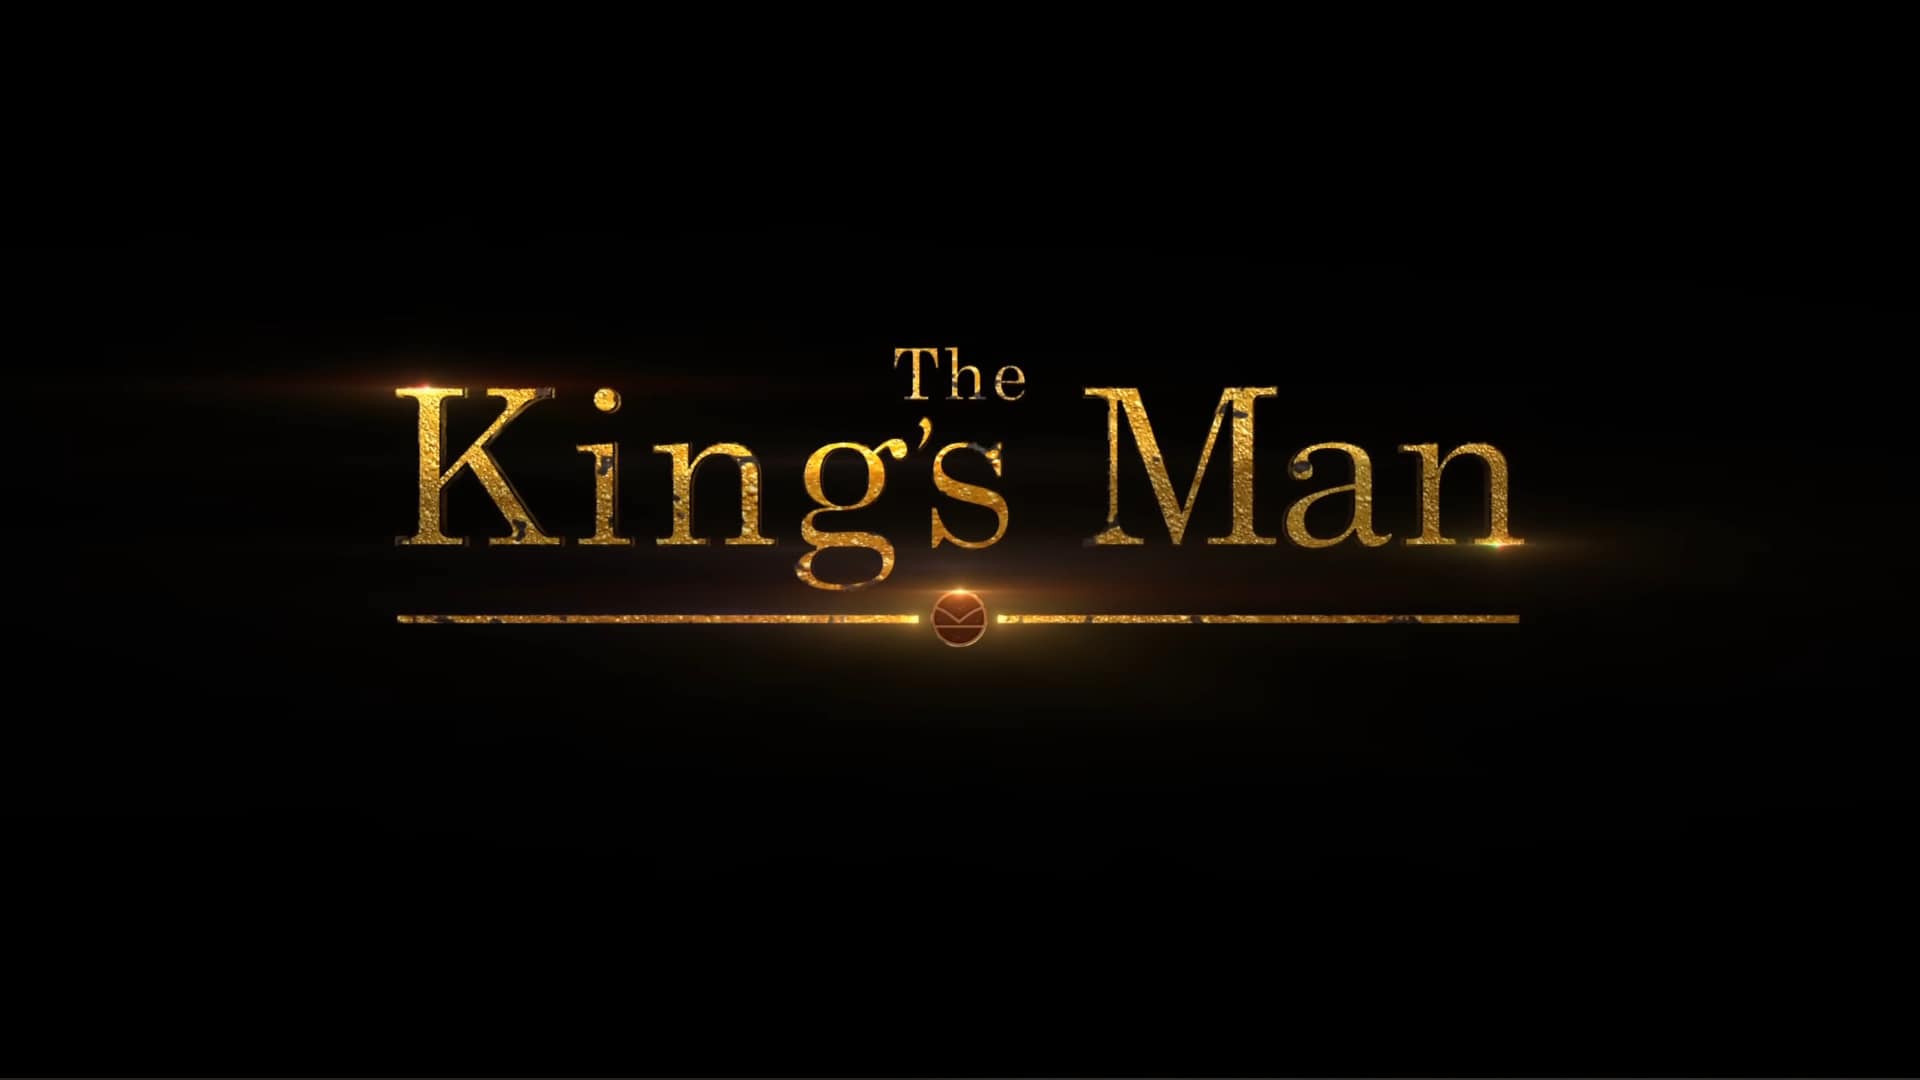 The King’s Man (2021) – Review/ Summary (with Spoilers)